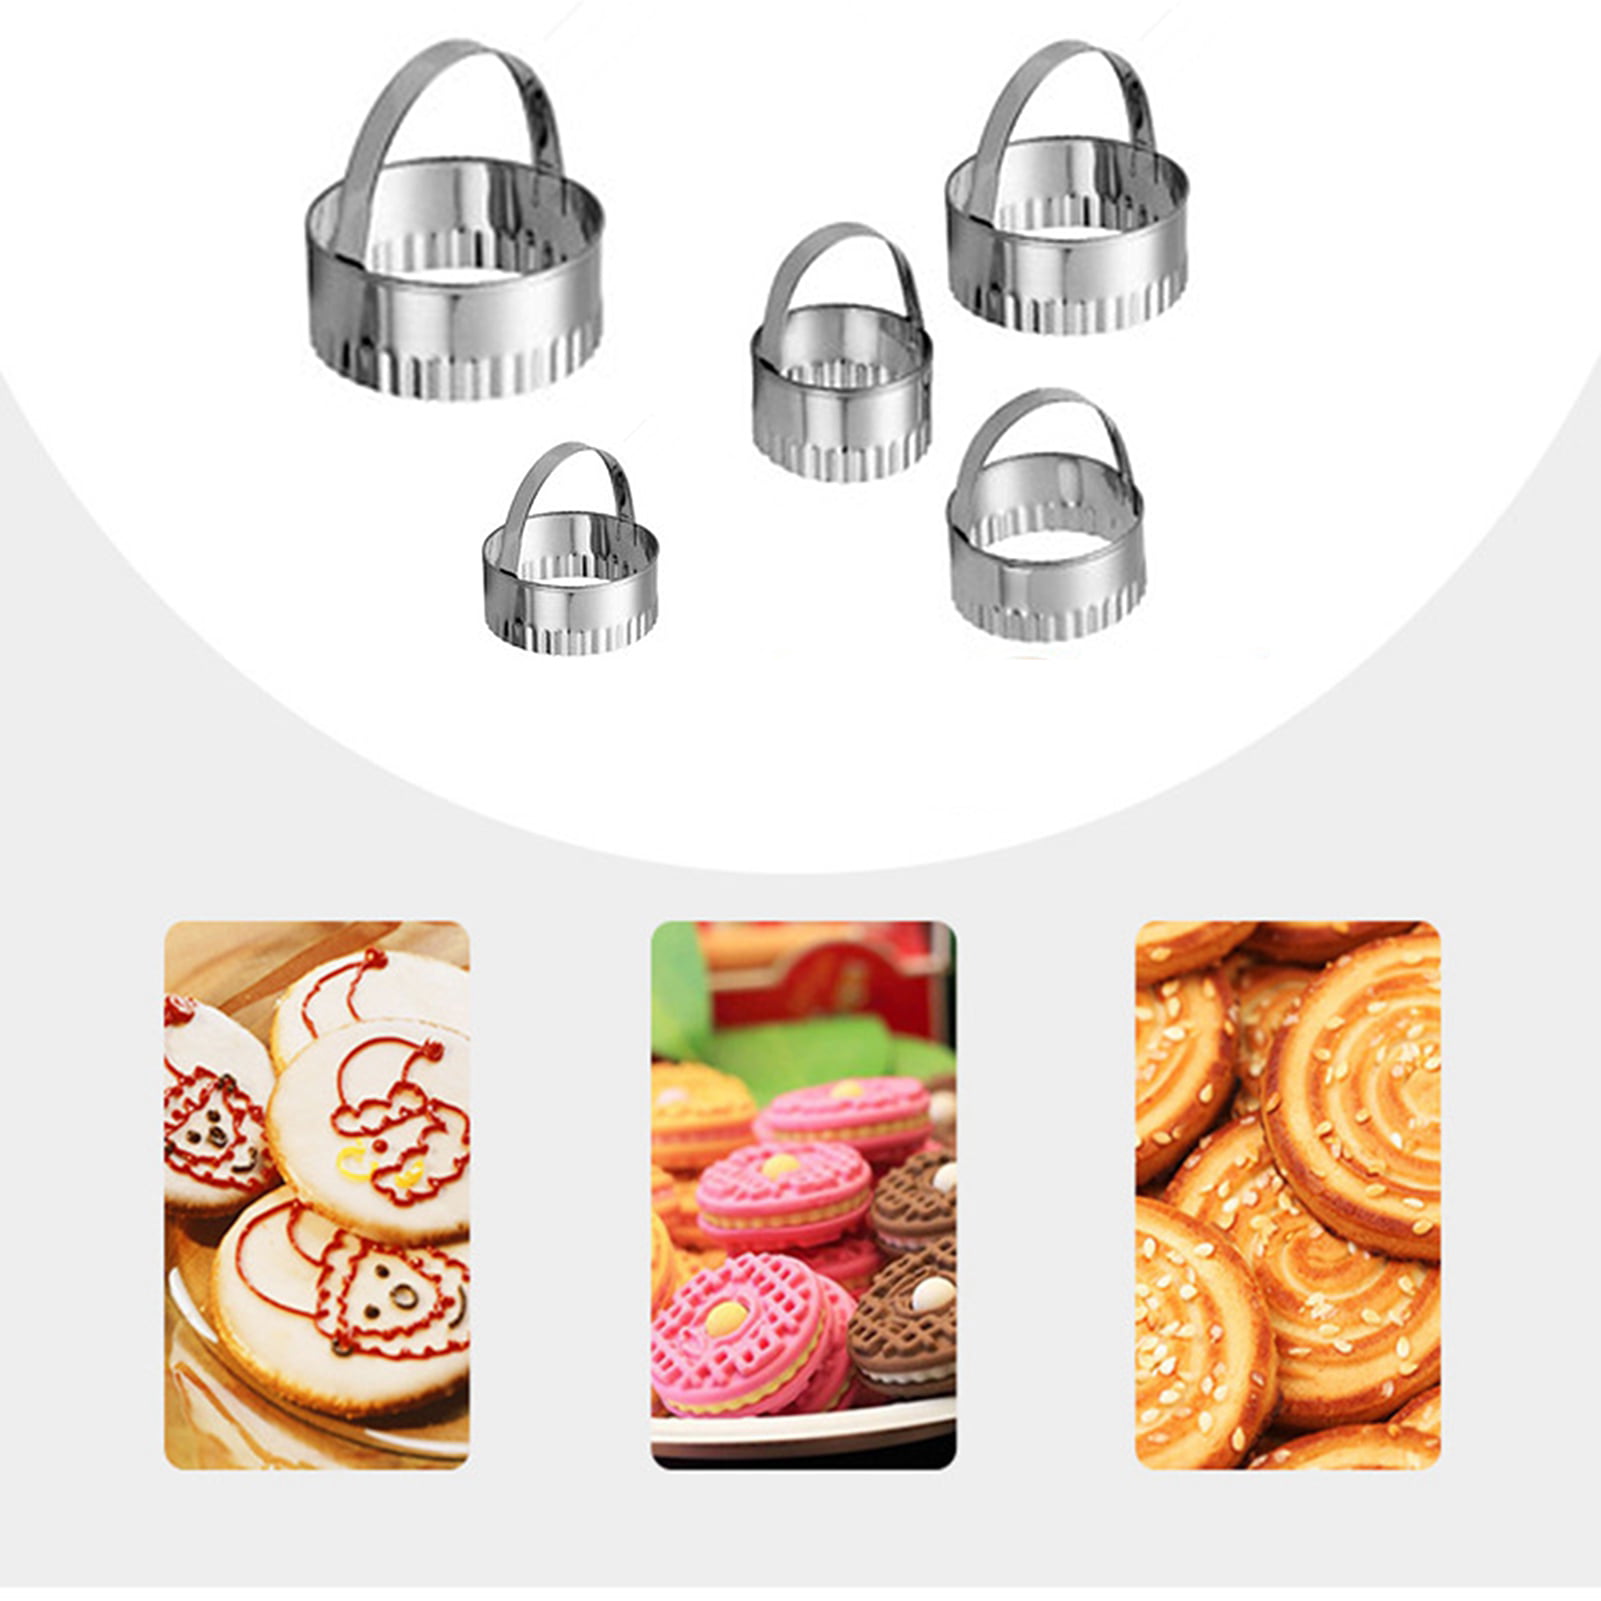 Details about   New Steel Cookie Cutter Biscuit Jelly Fondant Cake D1T5 Kitchen·Tools NICE 